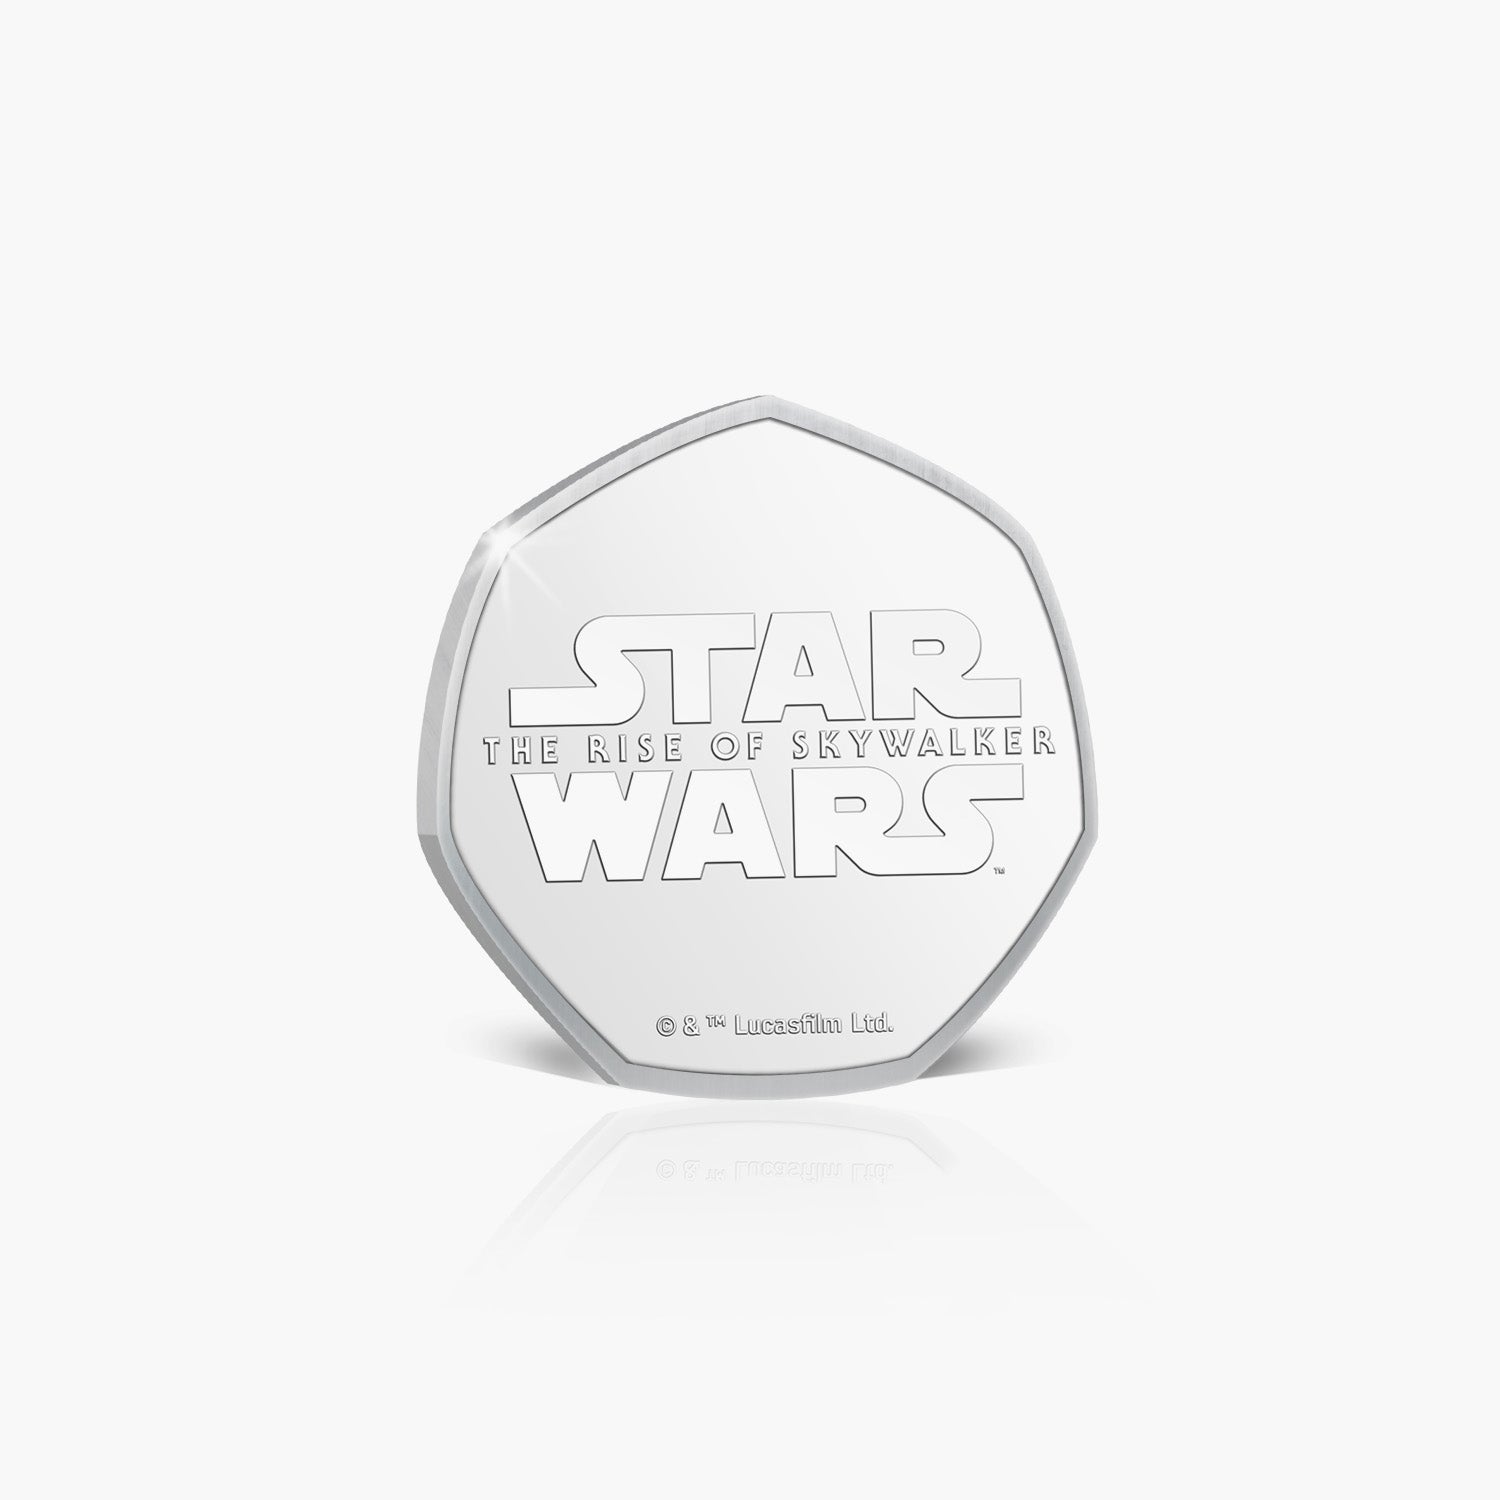 Knights of Ren #2 Silver-Plated Commemorative